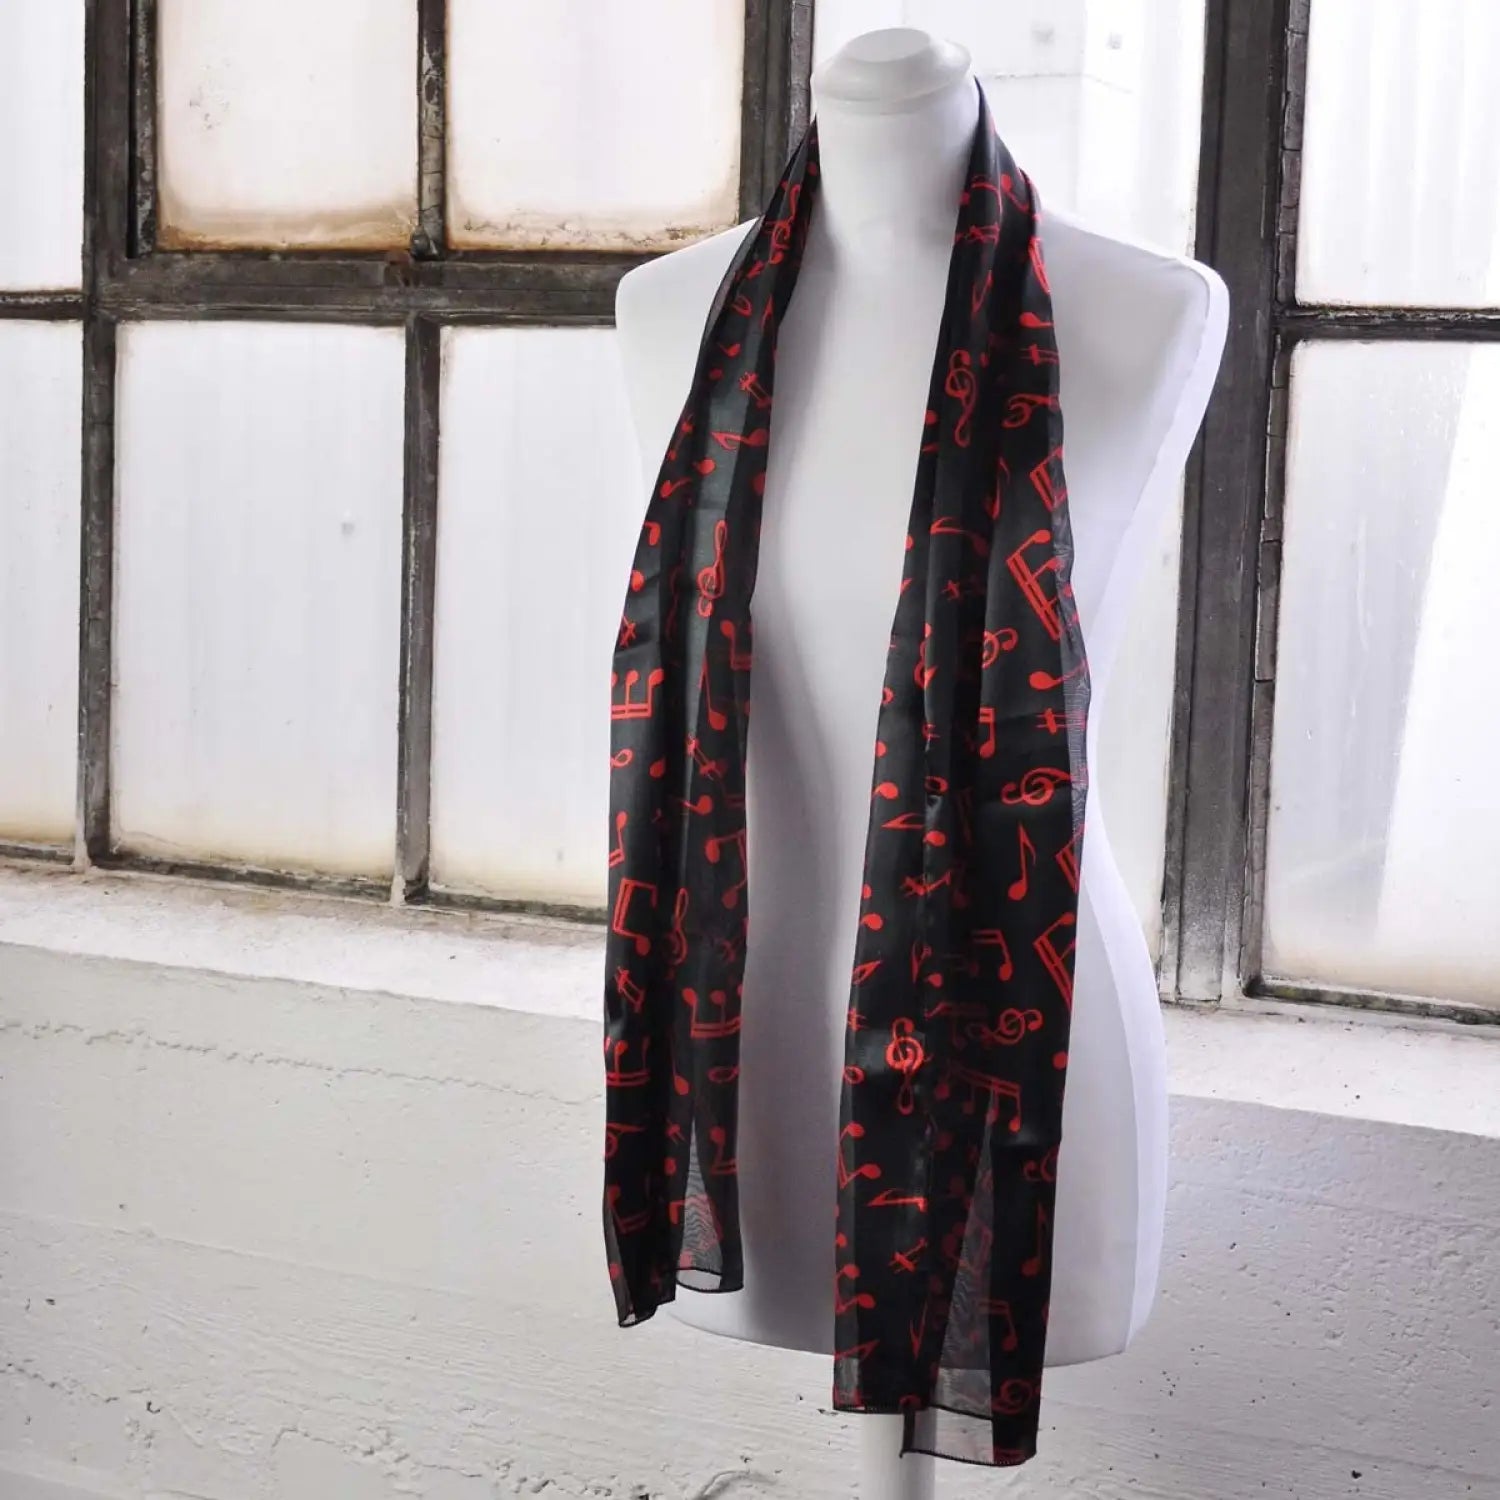 Black and red satin stripe scarf with musical note symbols